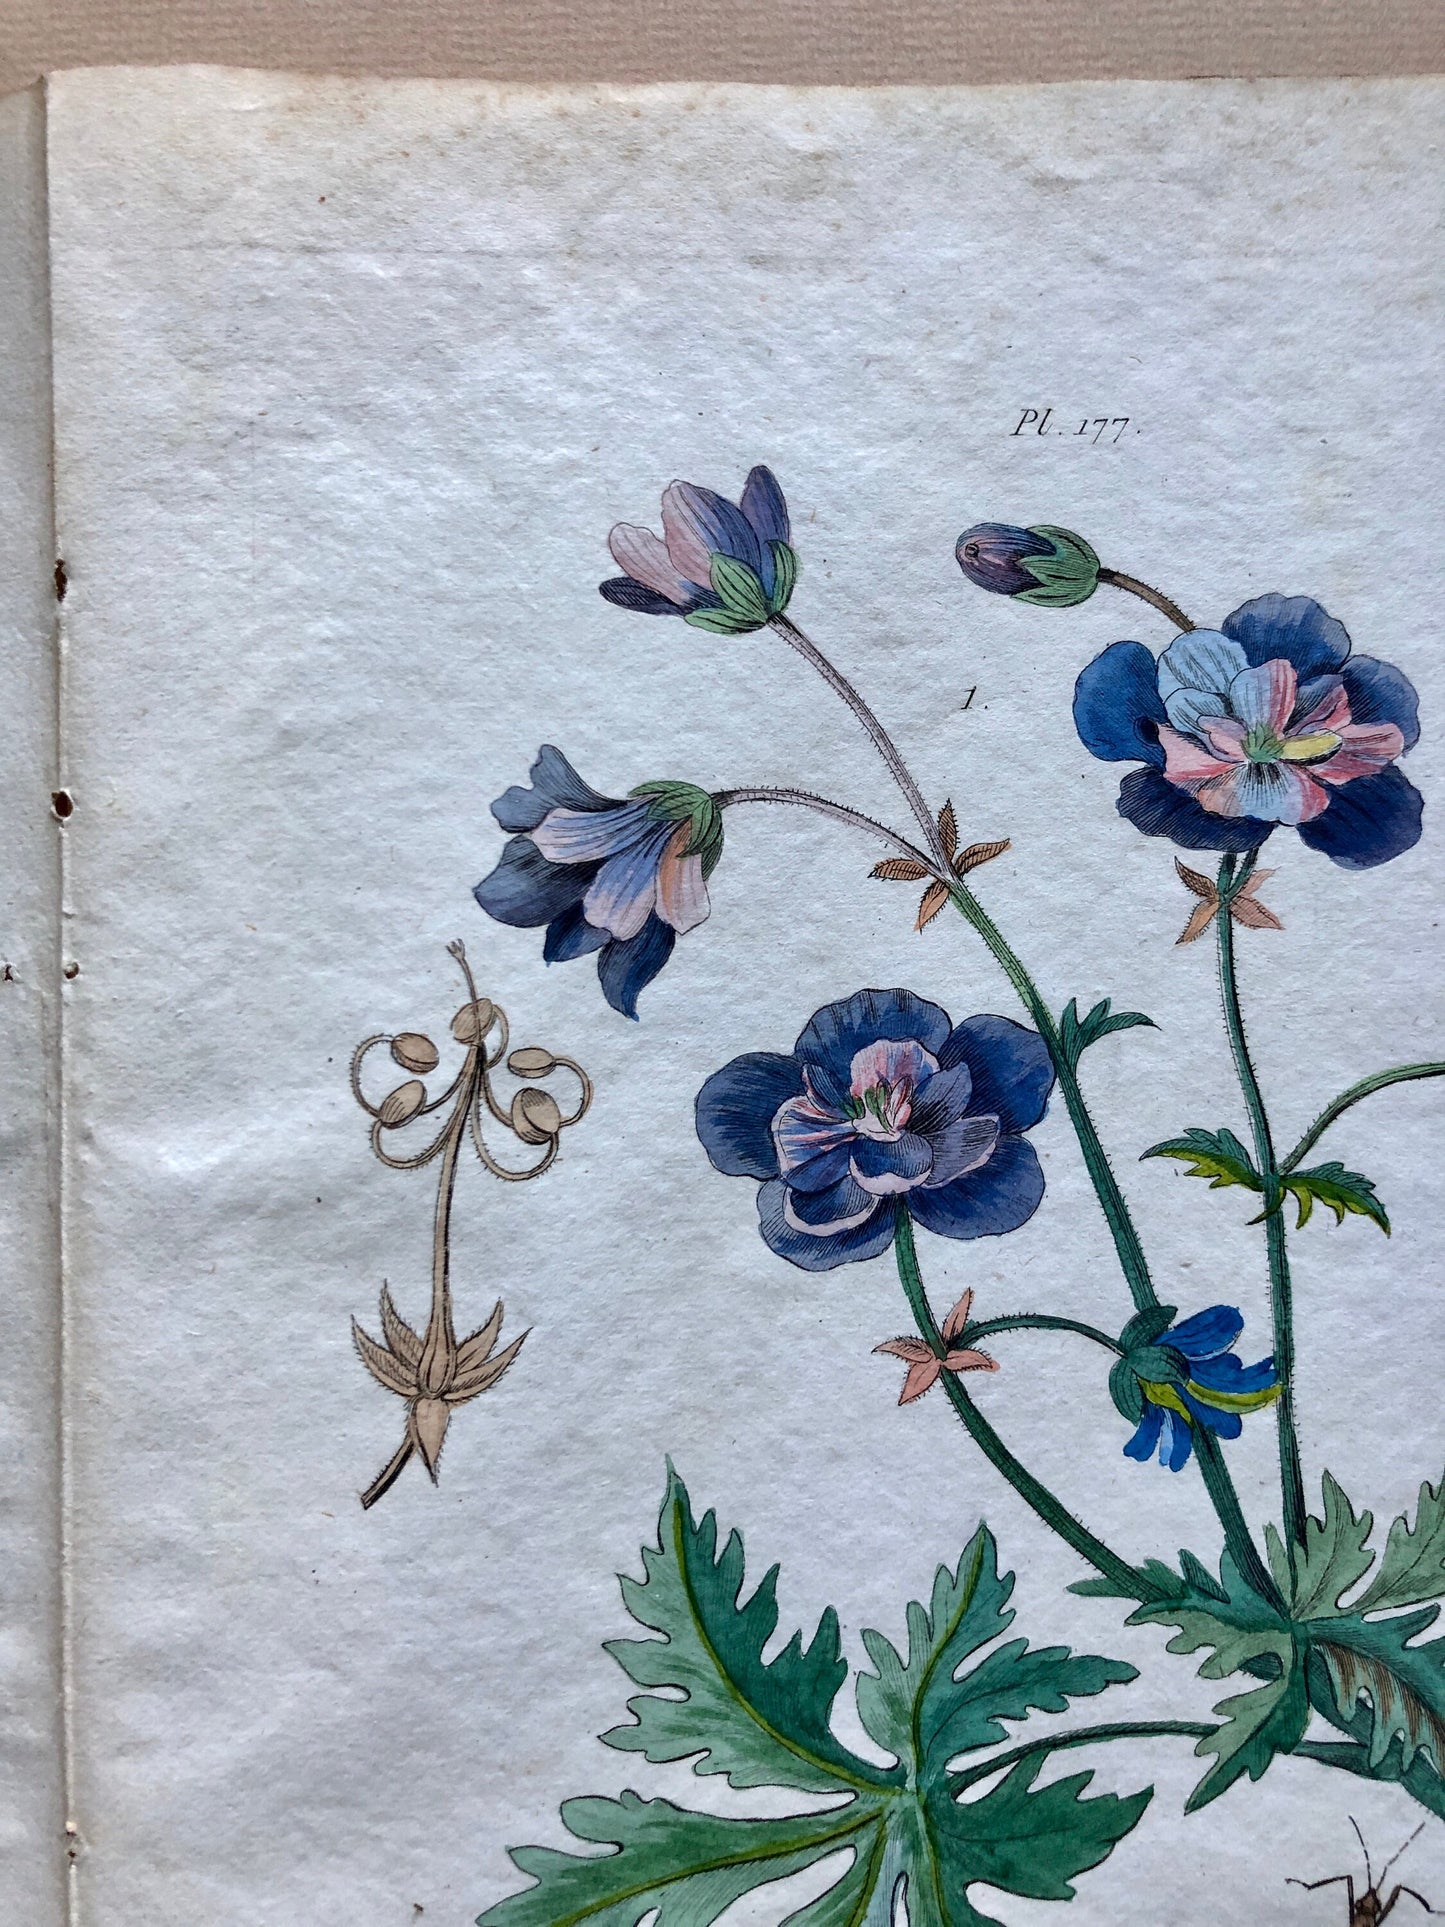 Two Antique Prints (1830s) From a French Dictionary Featuring Plants, Insects and a Jerboa. Size: 28. X 18 cms.